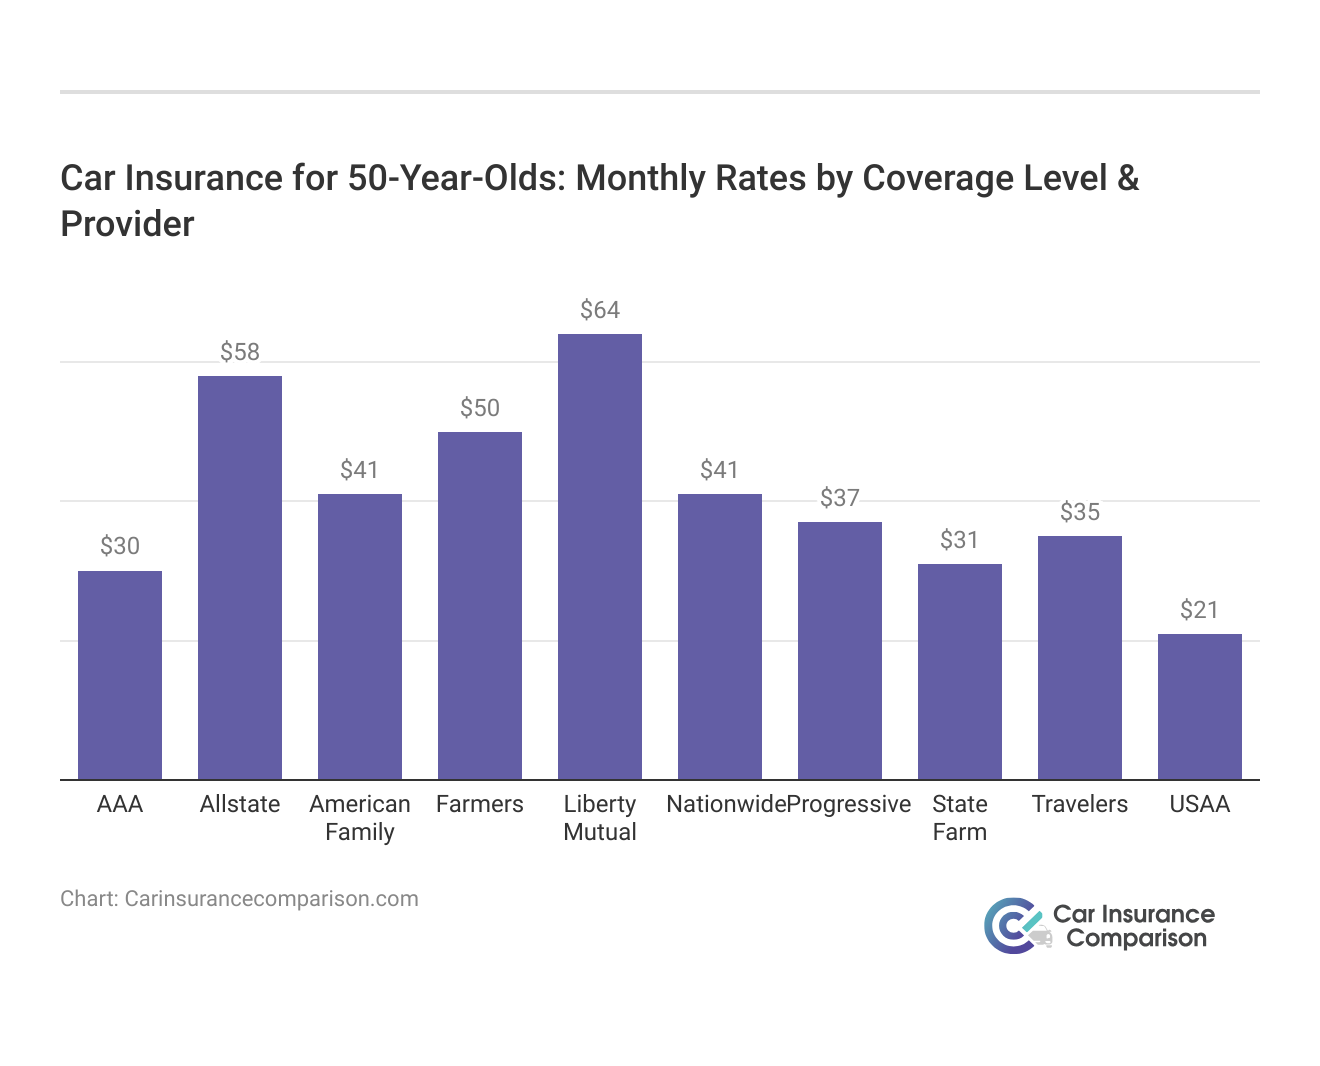 <h3>Car Insurance for 50-Year-Olds: Monthly Rates by Coverage Level & Provider</h3>